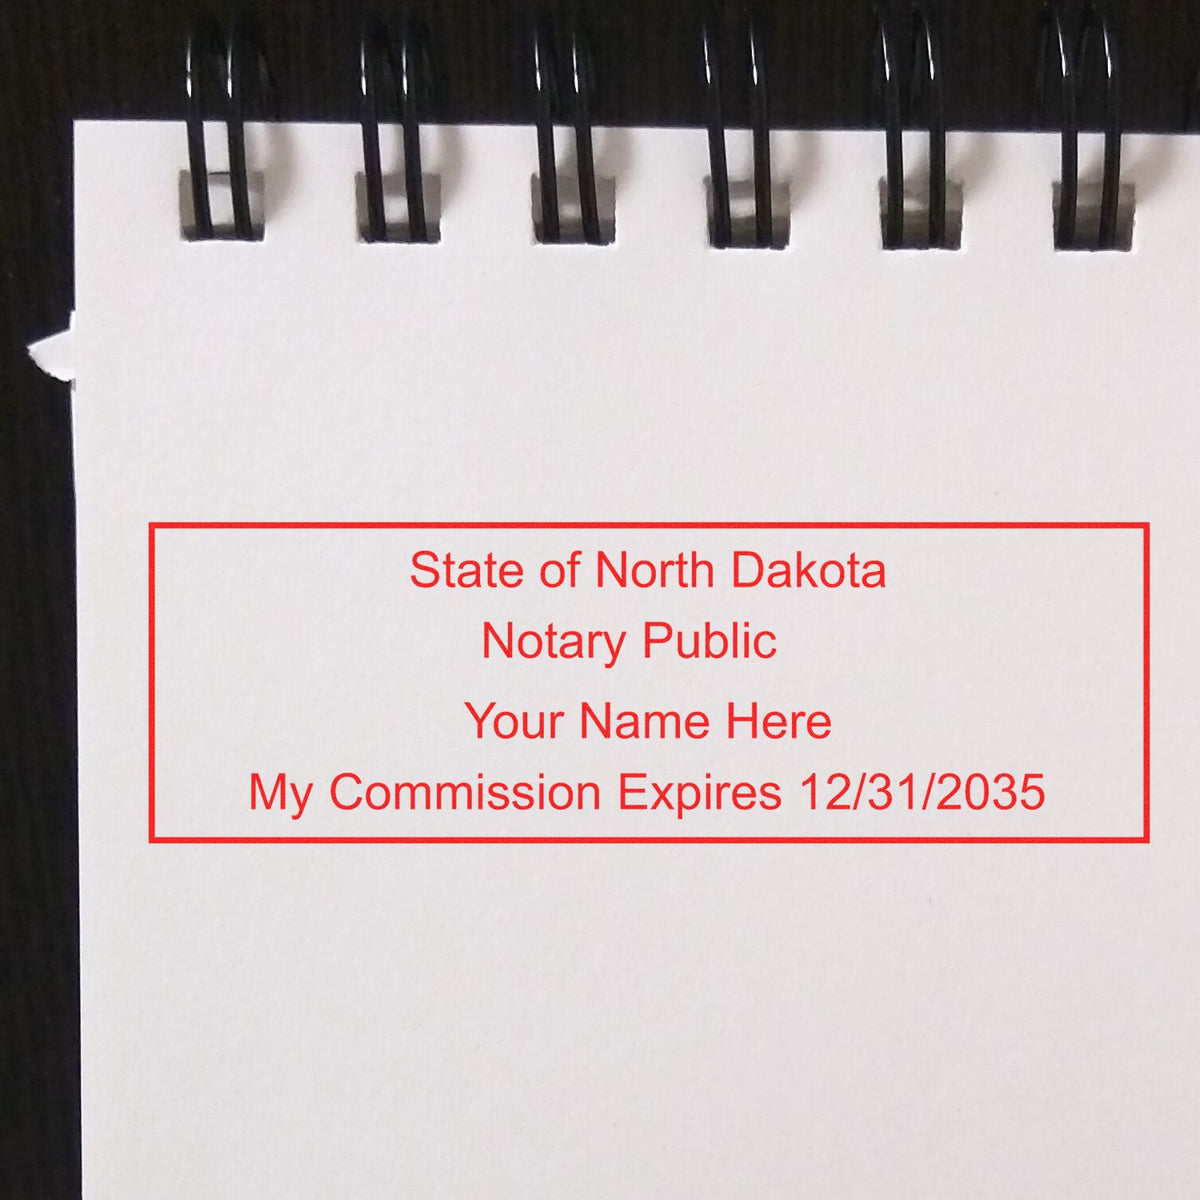 The Self-Inking Rectangular North Dakota Notary Stamp stamp impression comes to life with a crisp, detailed photo on paper - showcasing true professional quality.